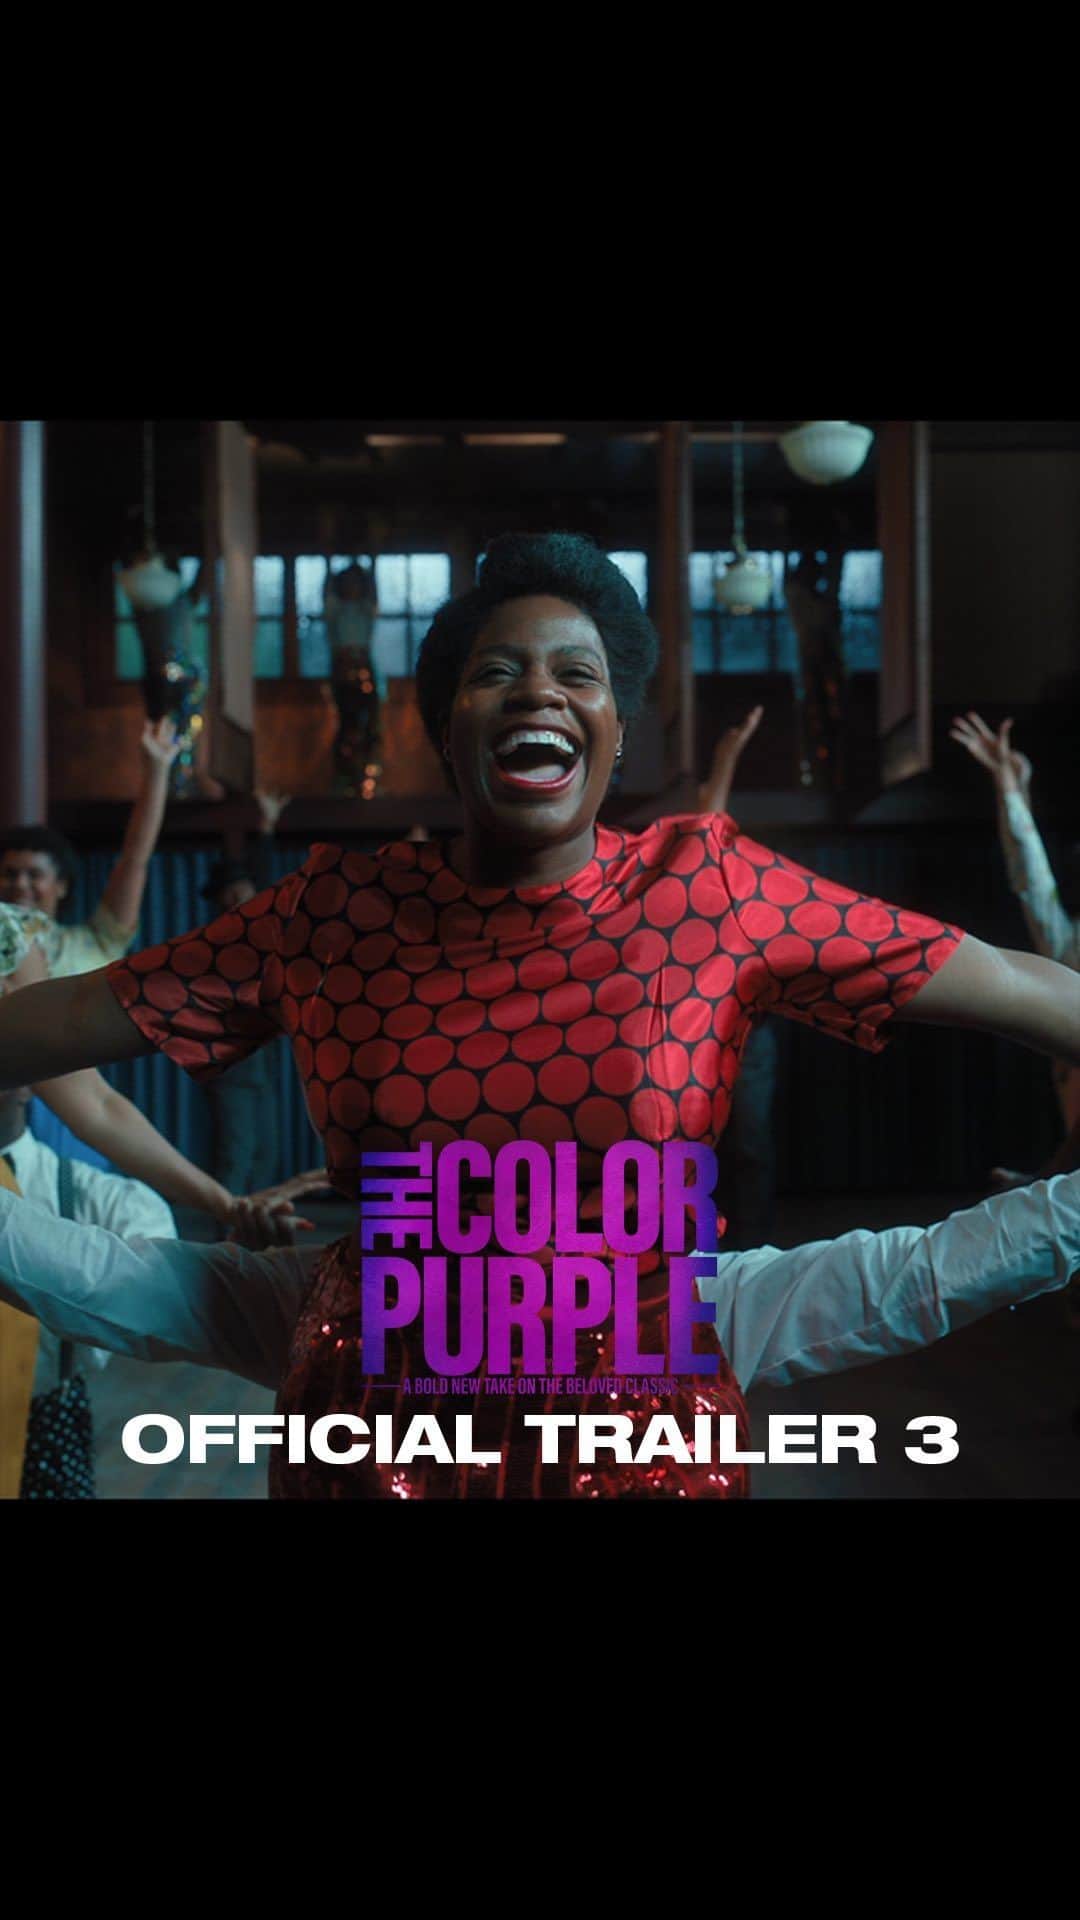 Warner Bros. Picturesのインスタグラム：「Don’t miss the motion picture event of the holiday season. #TheColorPurple arrives only in theaters Christmas Day - tickets on sale now. 💜」